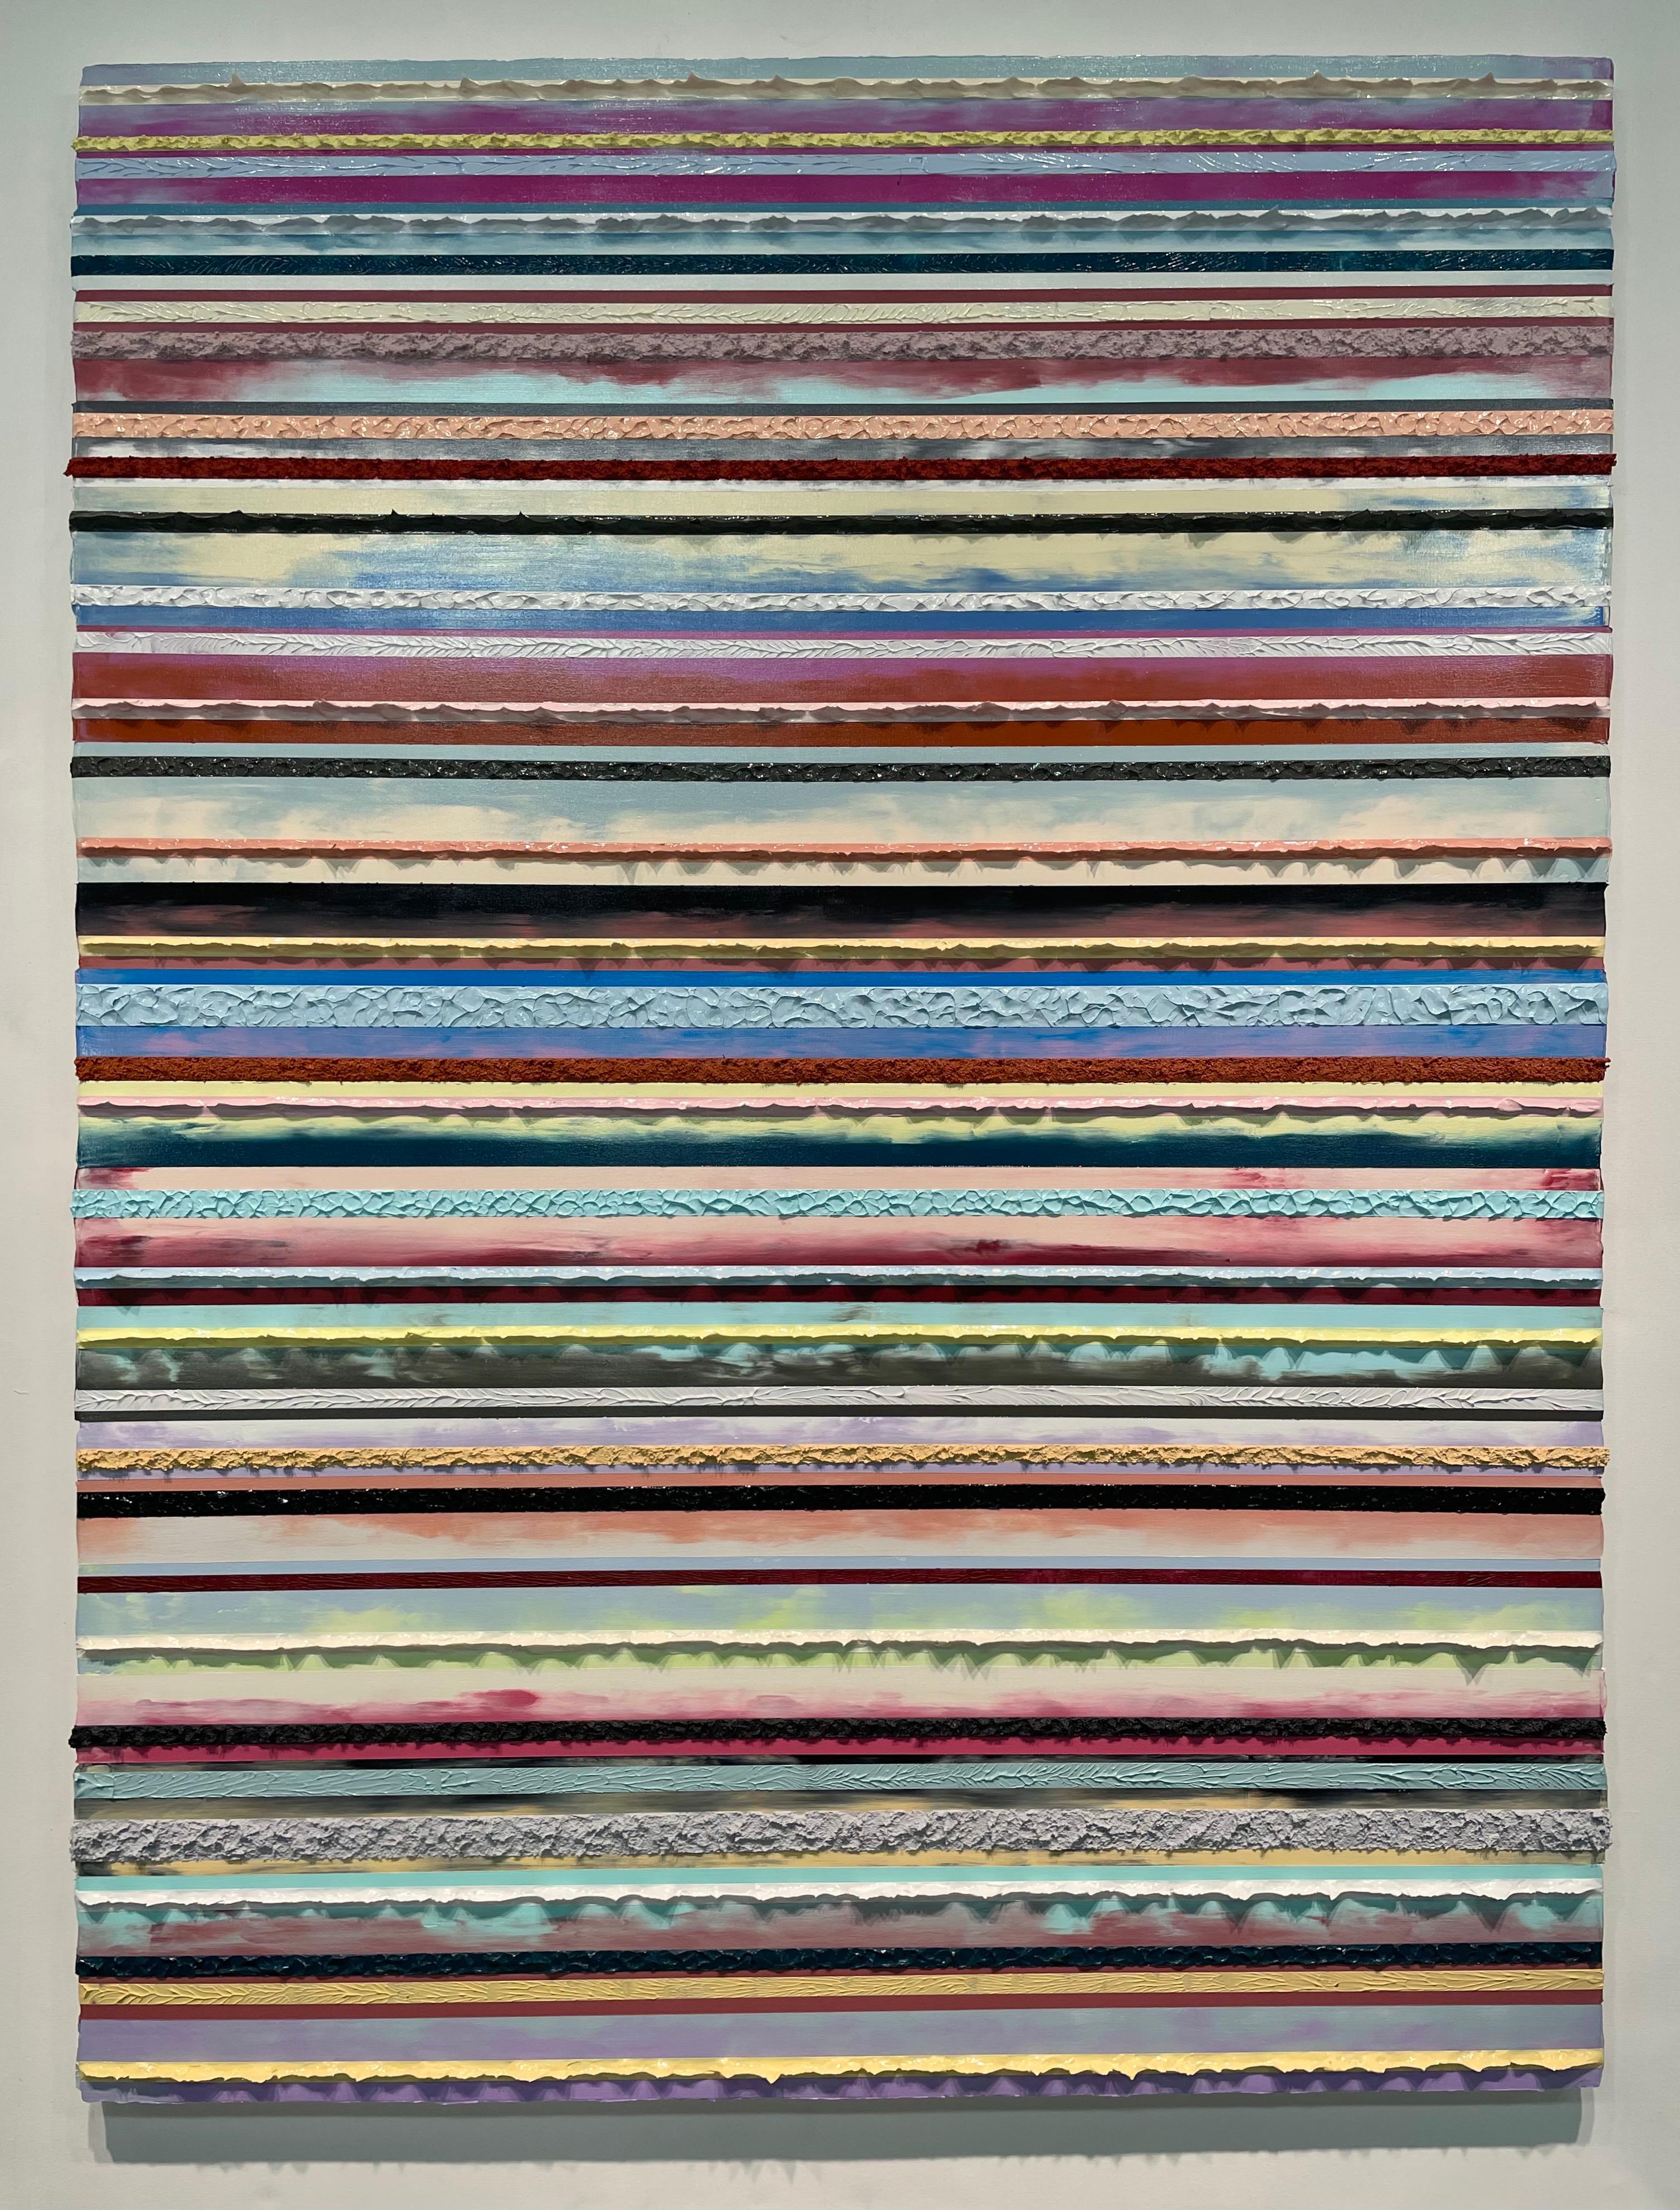 'Maple Peach Beat' is an excellent example of the paintings of Daniel Klewer, coming from his series 'Linear Tactility.' The paintings in this series all share a consistent, linearly divided composition with investigations into the visual and